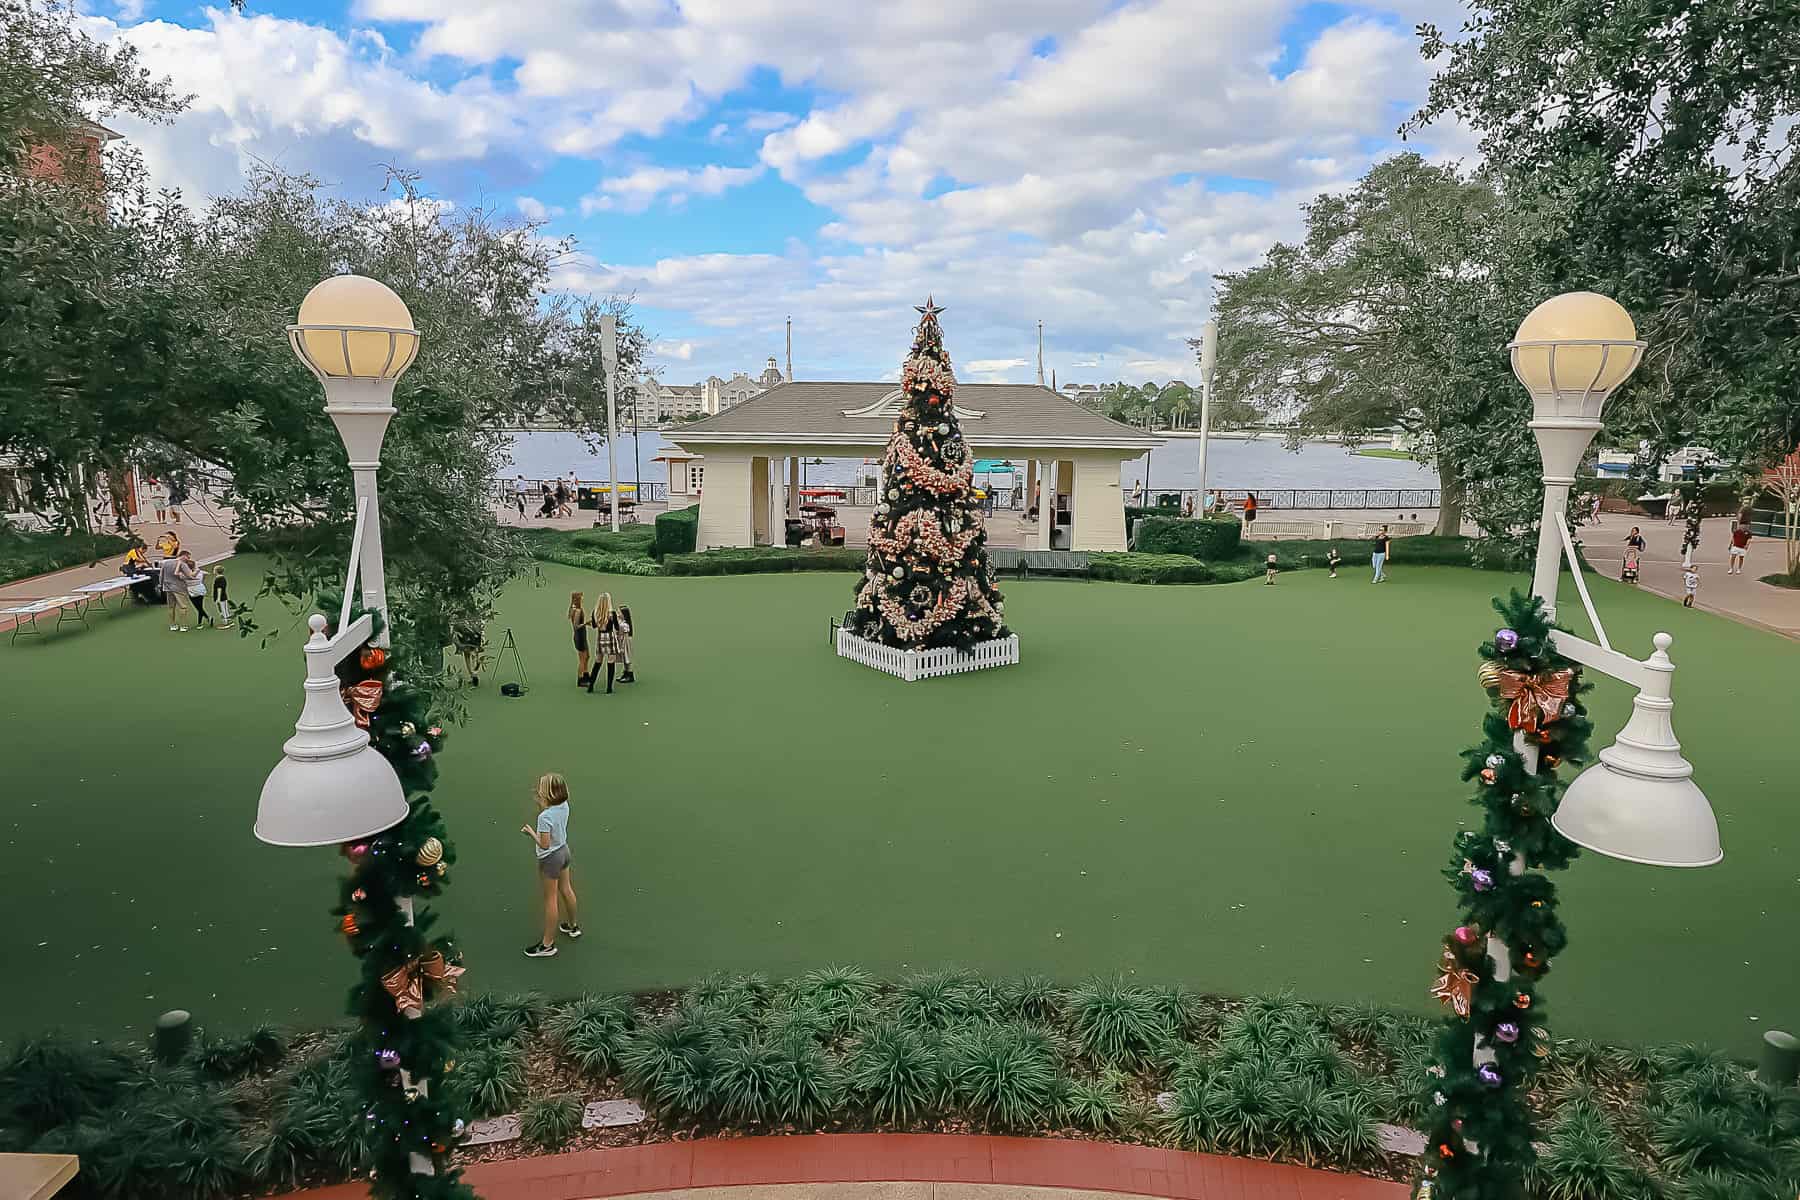 a view of the outdoor tree at Disney's Boardwalk taken from the verandah 